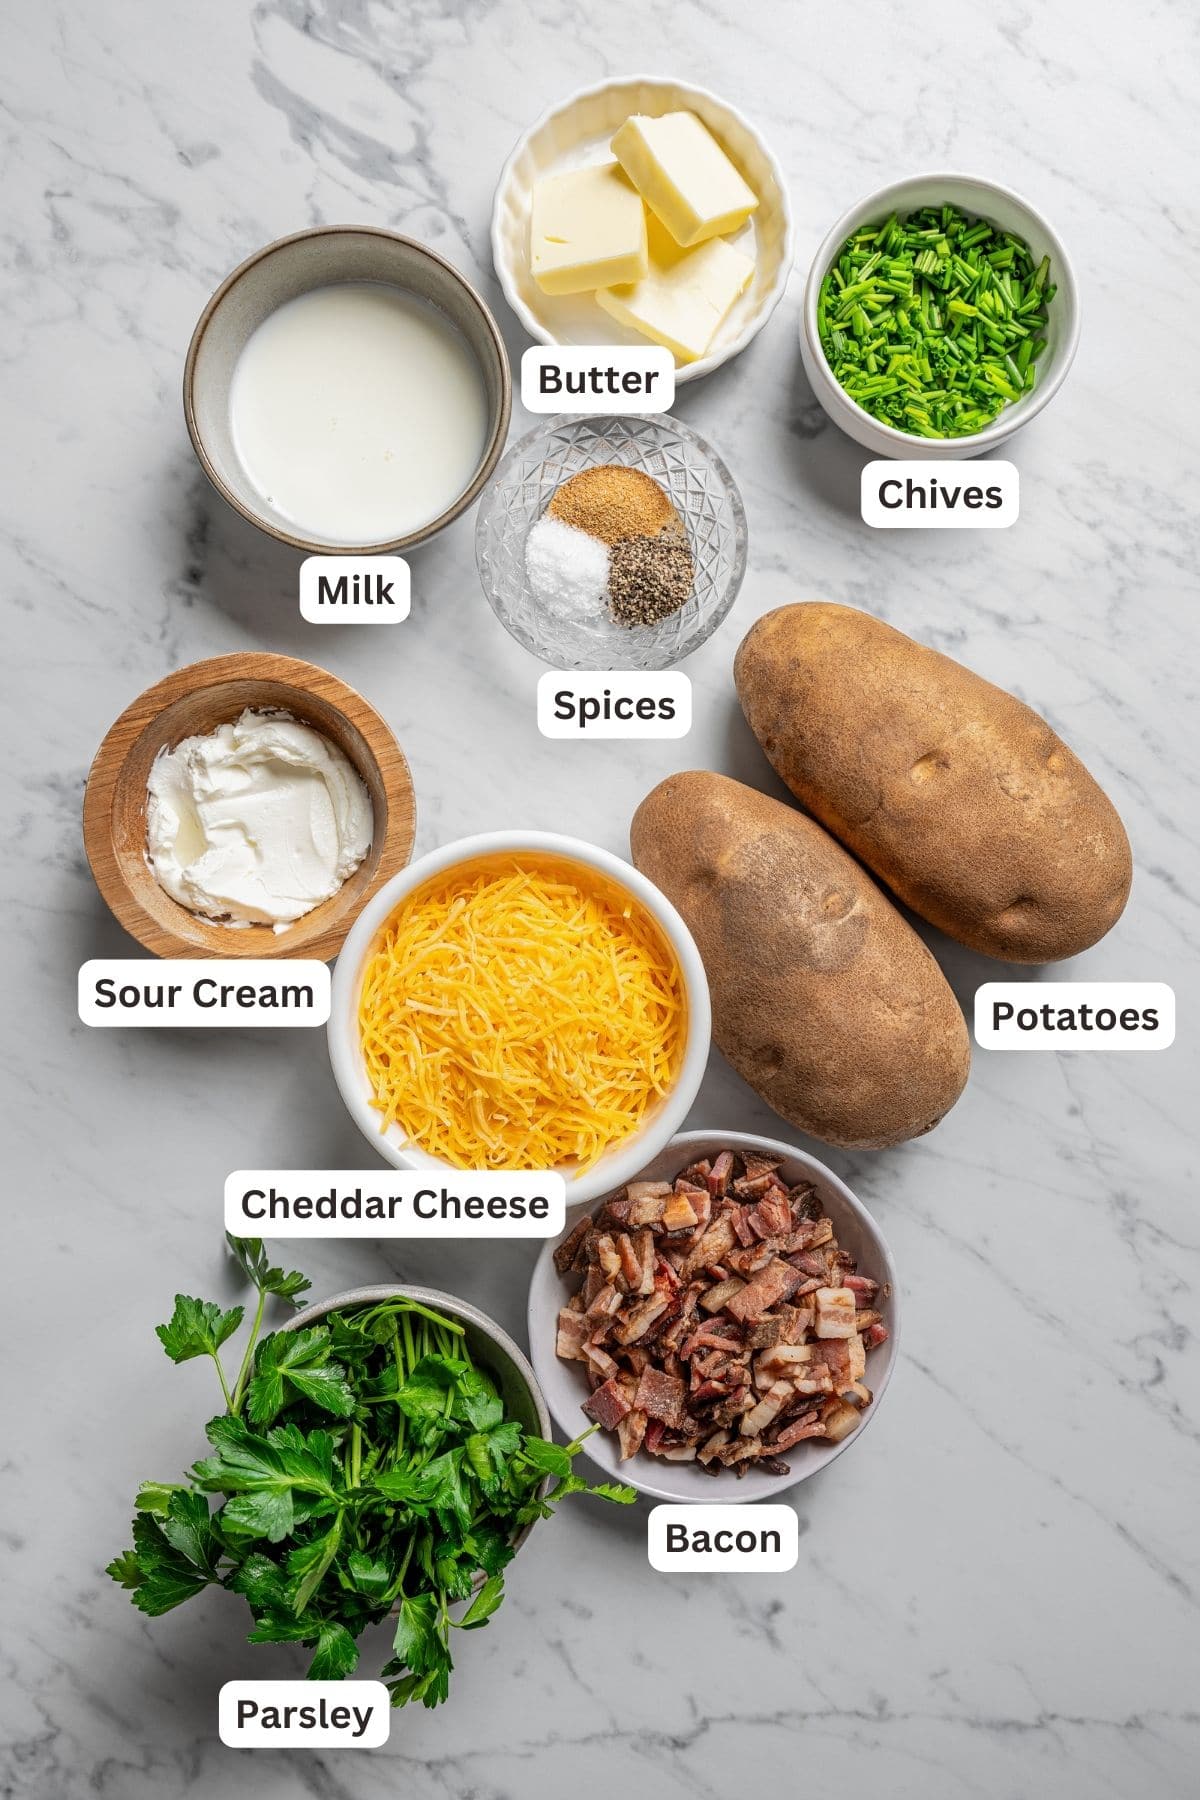 Labeled ingredients for mashed potatoes for potato croquettes.